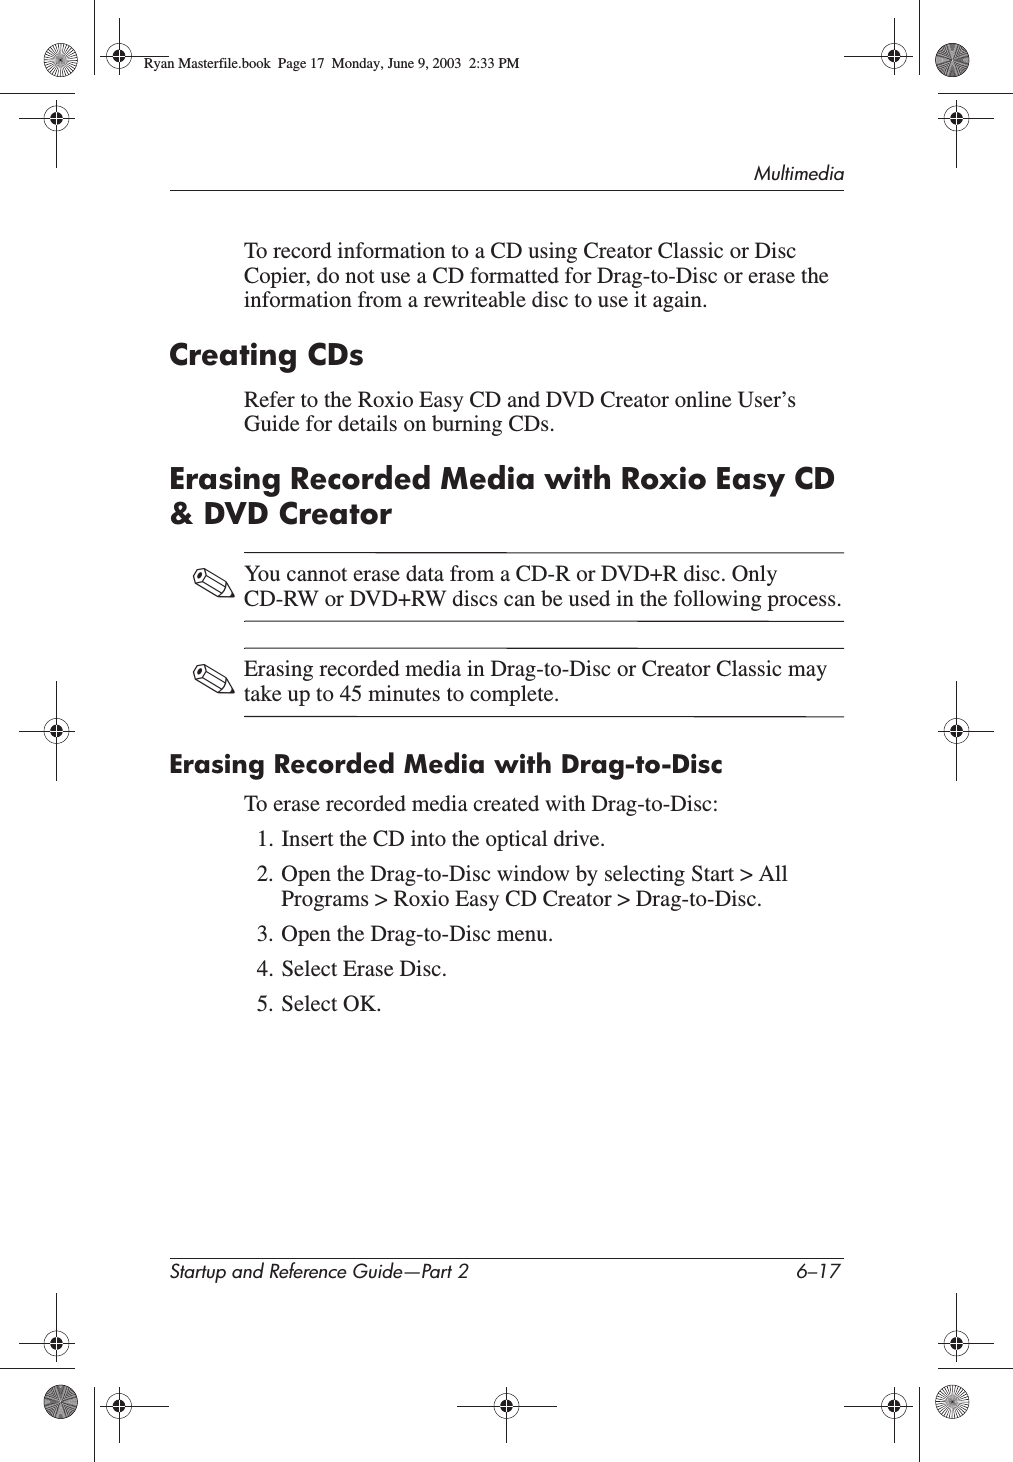 MultimediaStartup and Reference Guide—Part 2 6–17To record information to a CD using Creator Classic or Disc Copier, do not use a CD formatted for Drag-to-Disc or erase the information from a rewriteable disc to use it again.Creating CDsRefer to the Roxio Easy CD and DVD Creator online User’s Guide for details on burning CDs.Erasing Recorded Media with Roxio Easy CD &amp; DVD Creator✎You cannot erase data from a CD-R or DVD+R disc. Only CD-RW or DVD+RW discs can be used in the following process.✎Erasing recorded media in Drag-to-Disc or Creator Classic may take up to 45 minutes to complete.Erasing Recorded Media with Drag-to-DiscTo erase recorded media created with Drag-to-Disc:1. Insert the CD into the optical drive.2. Open the Drag-to-Disc window by selecting Start &gt; All Programs &gt; Roxio Easy CD Creator &gt; Drag-to-Disc.3. Open the Drag-to-Disc menu.4. Select Erase Disc.5. Select OK.Ryan Masterfile.book  Page 17  Monday, June 9, 2003  2:33 PM